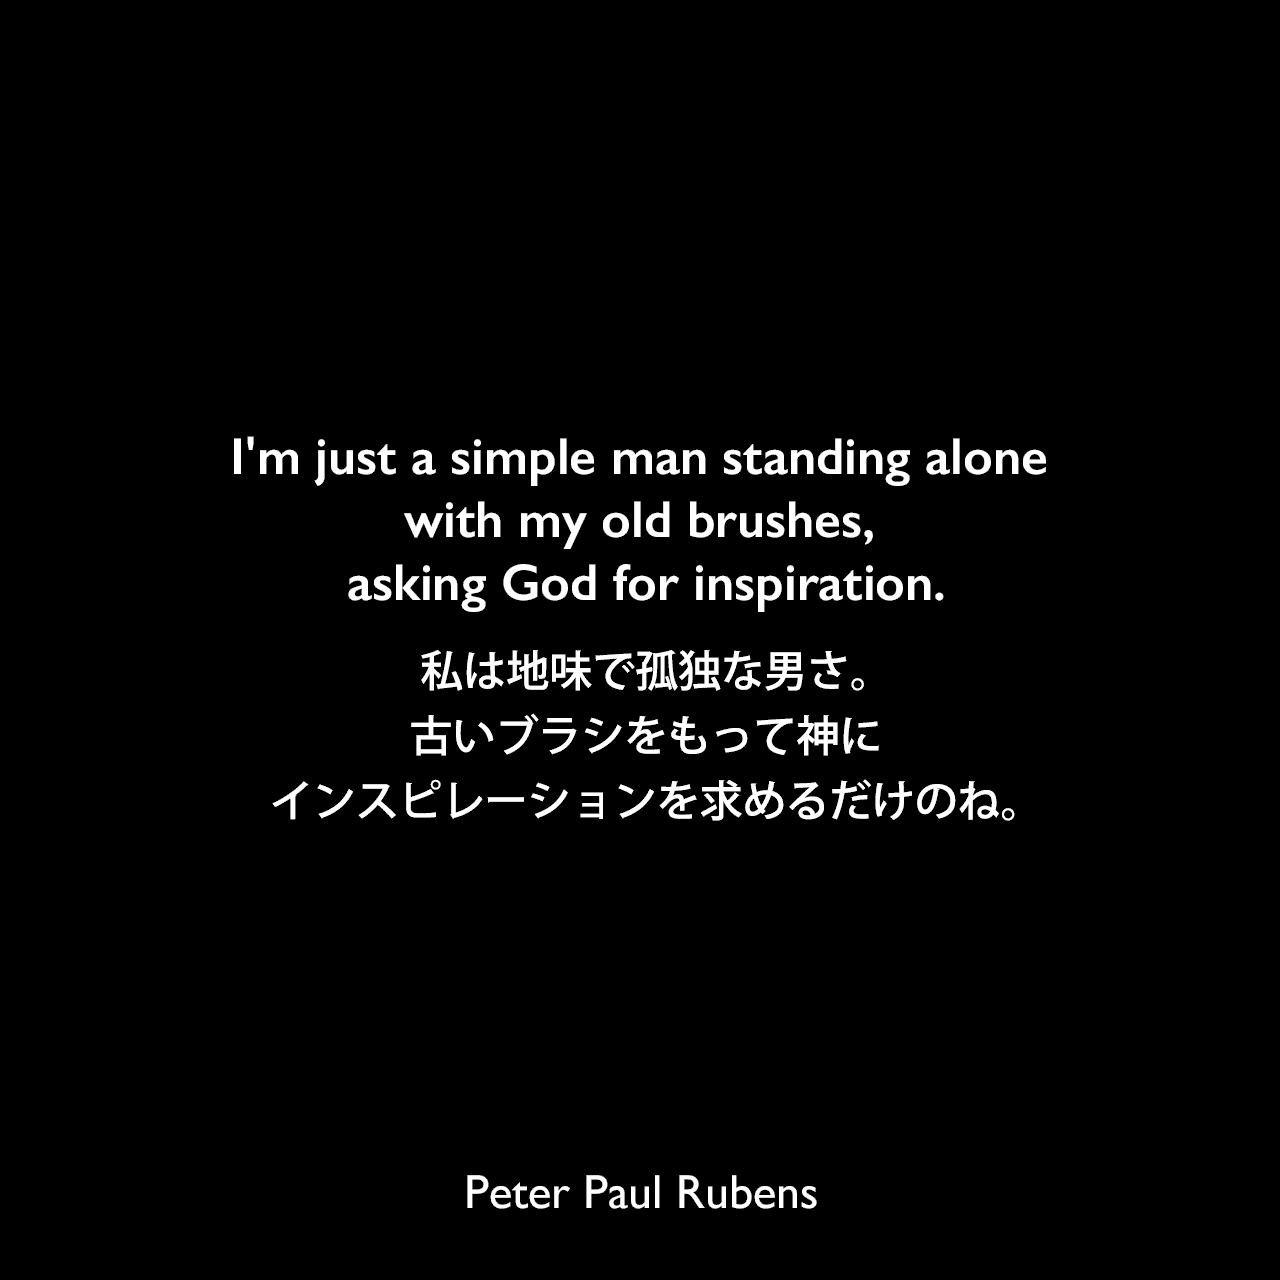 I'm just a simple man standing alone with my old brushes, asking God for inspiration.私は地味で孤独な男さ。古いブラシをもって神にインスピレーションを求めるだけのね。Peter Paul Rubens